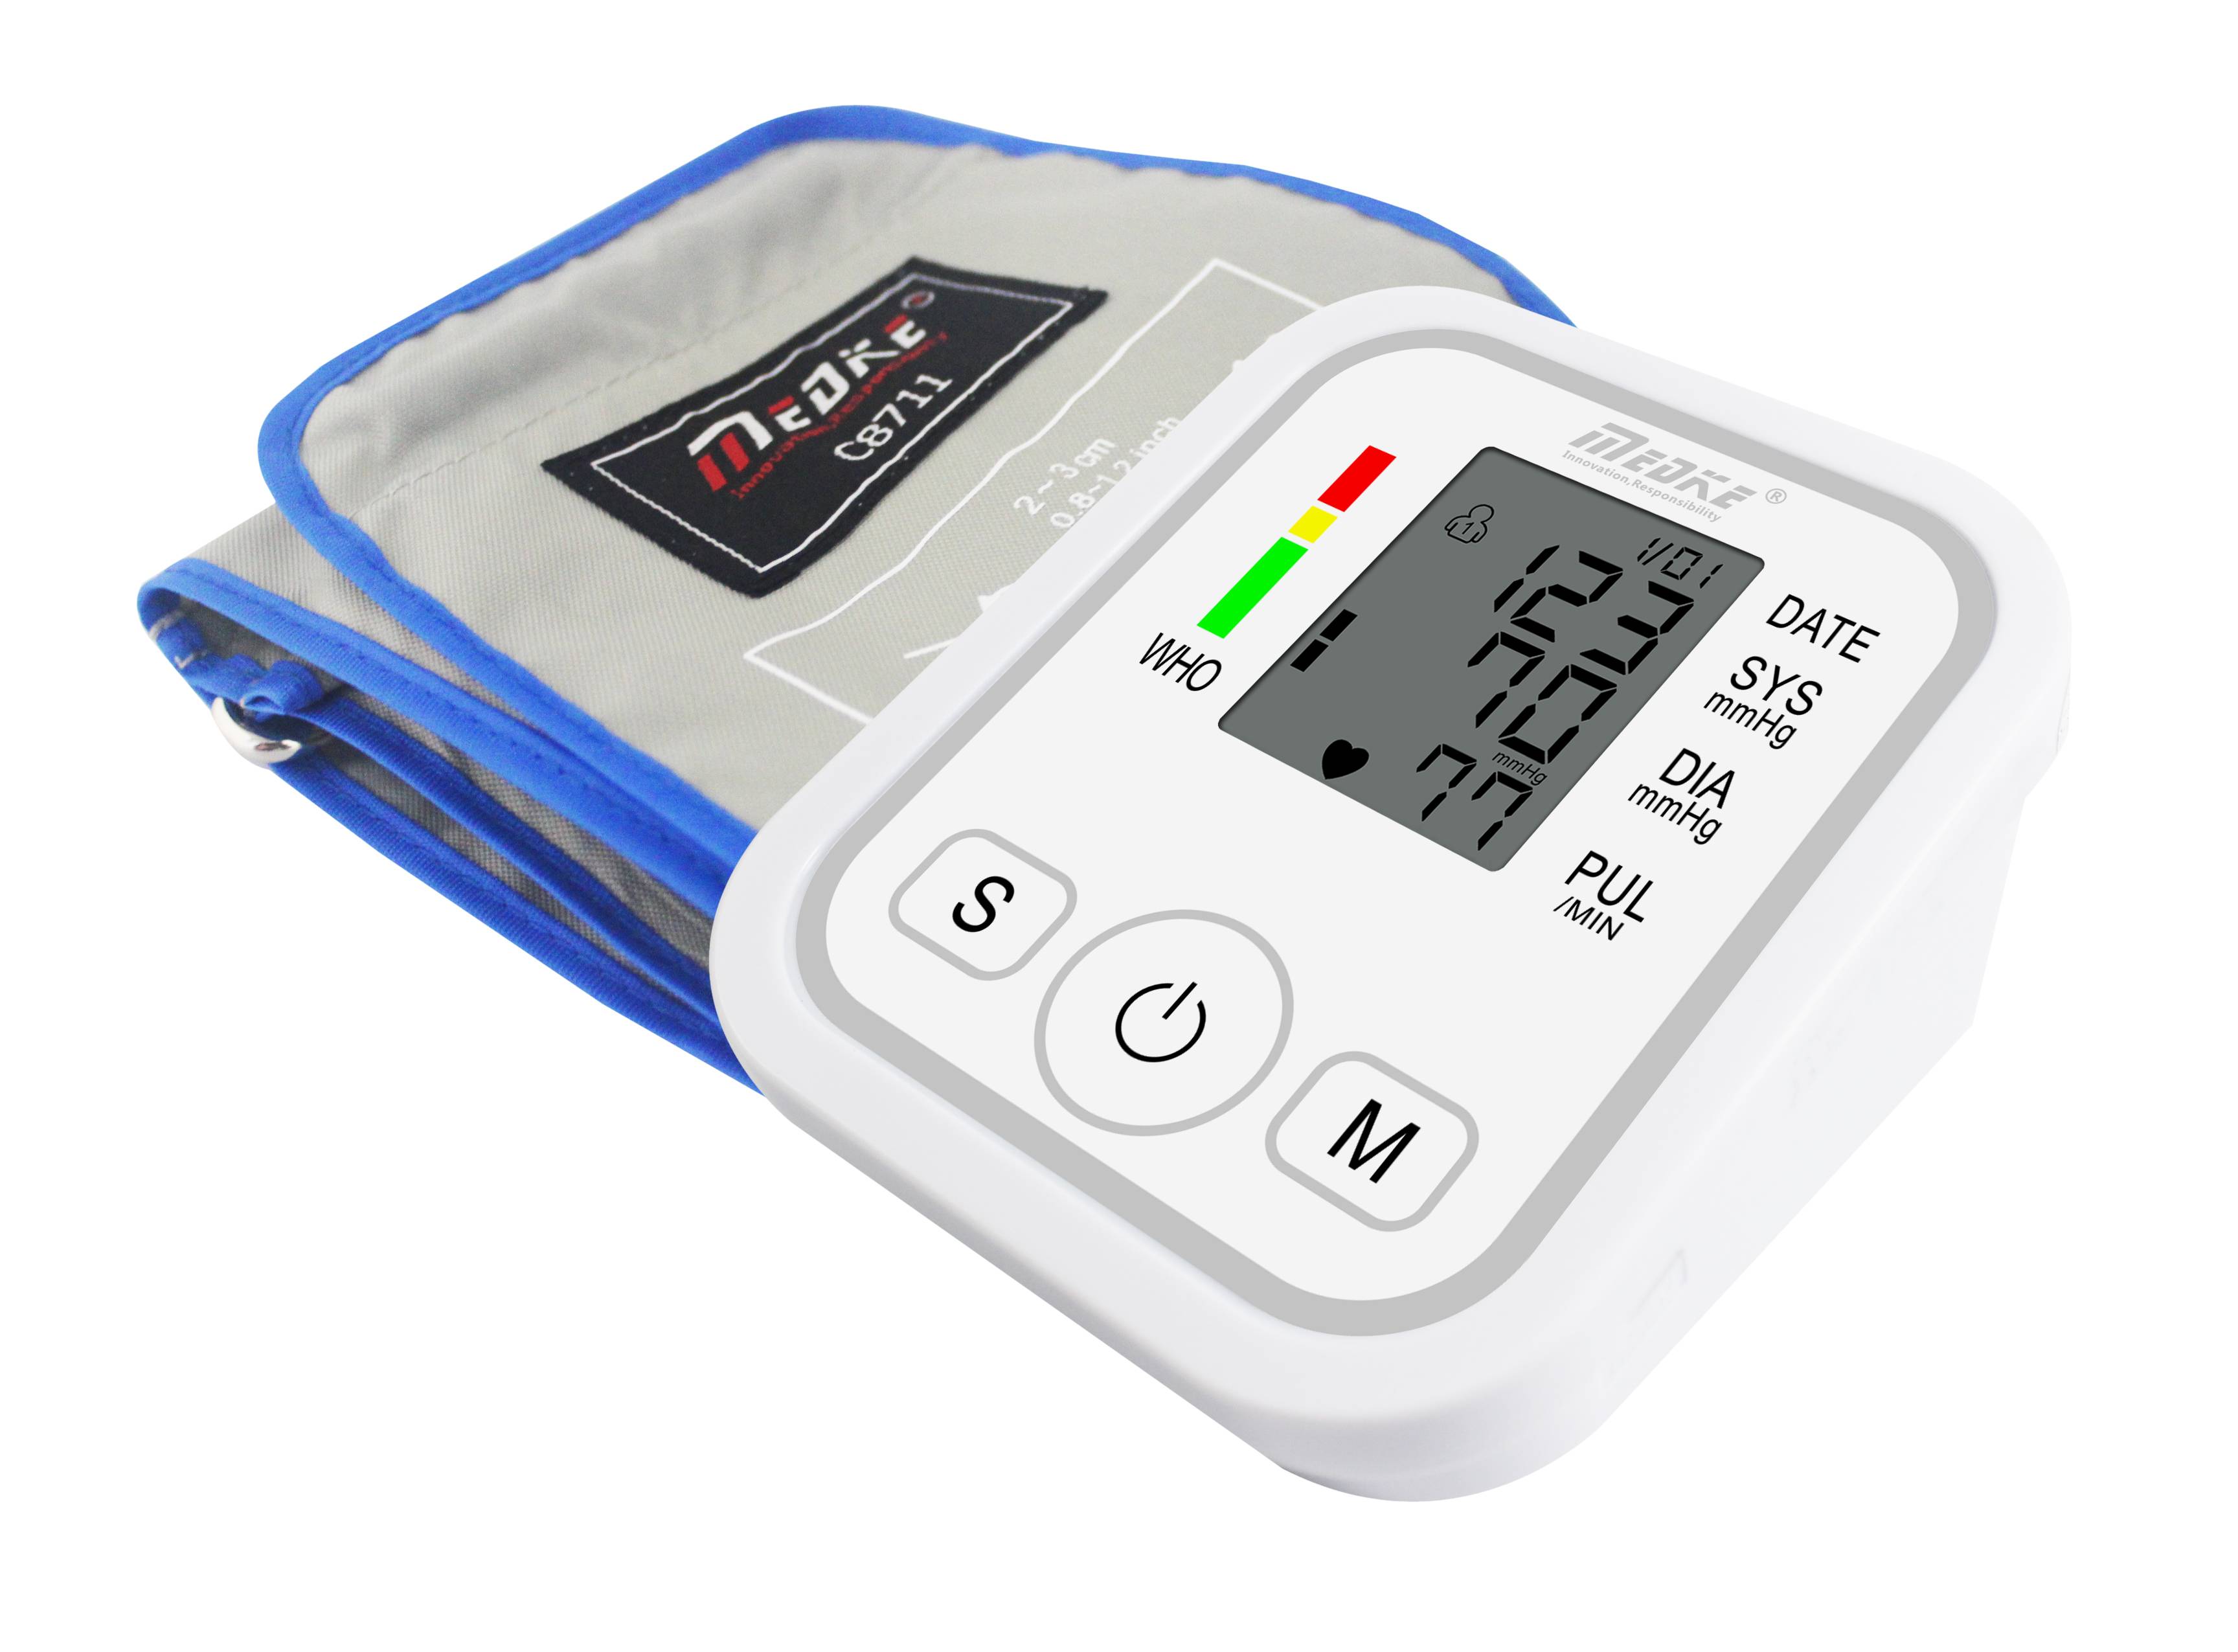 Wholesale High quality Upper Arm Blood Pressure Monitors China Manufacturer